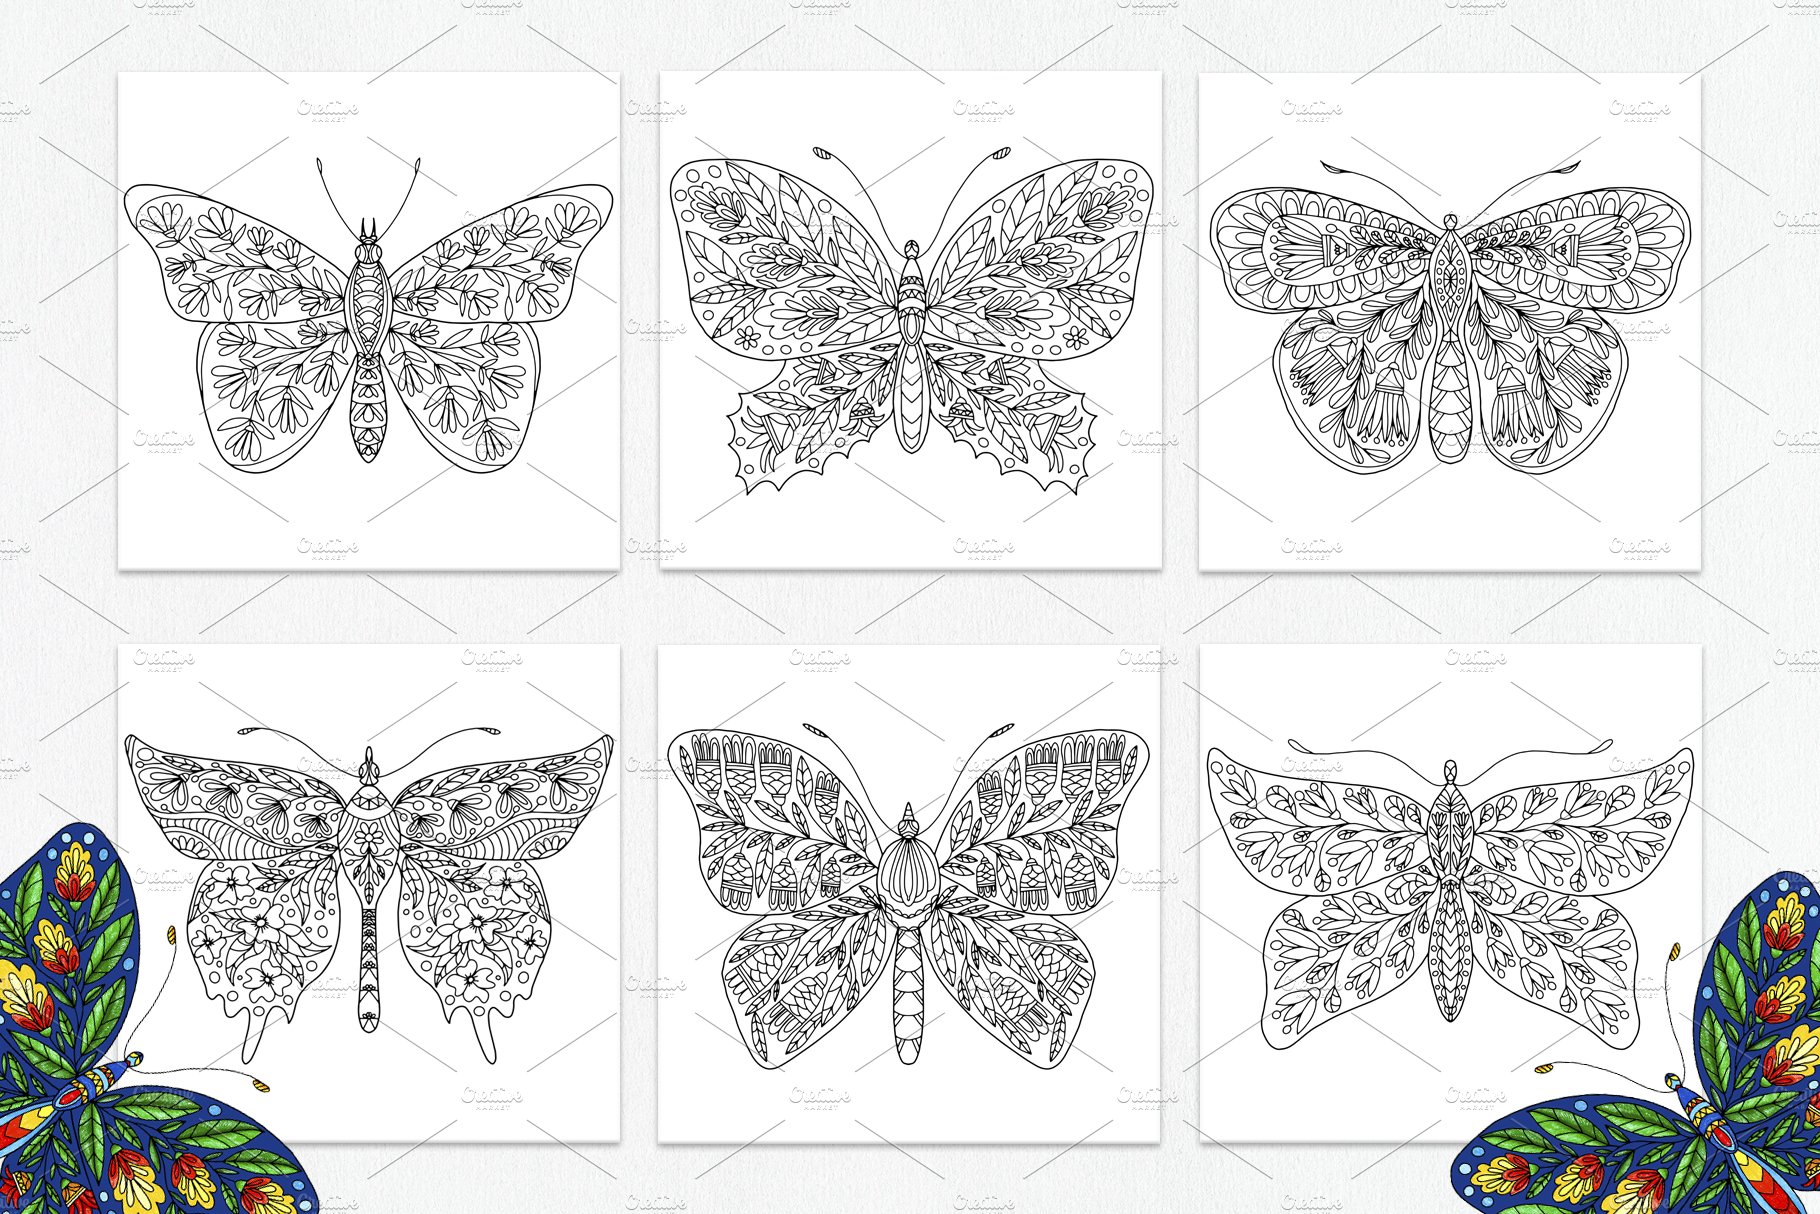 Butterflies with floral ornamentspreview image.